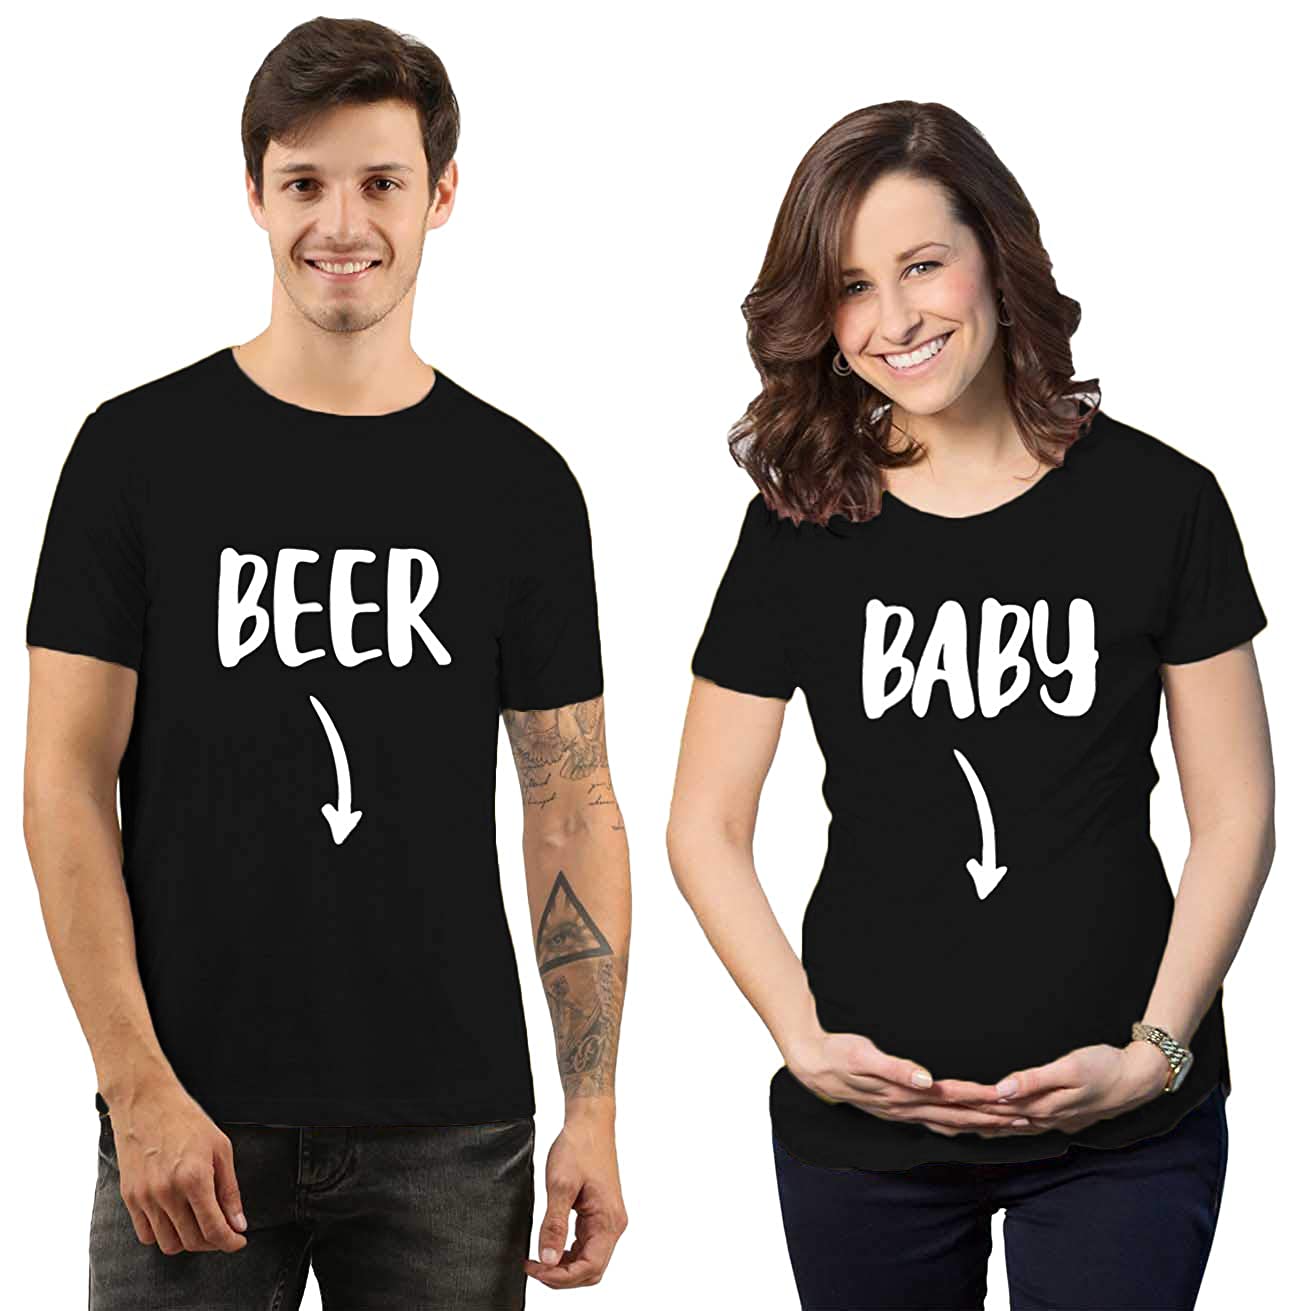 Beer & Baby Maternity Couple T shirts- Black